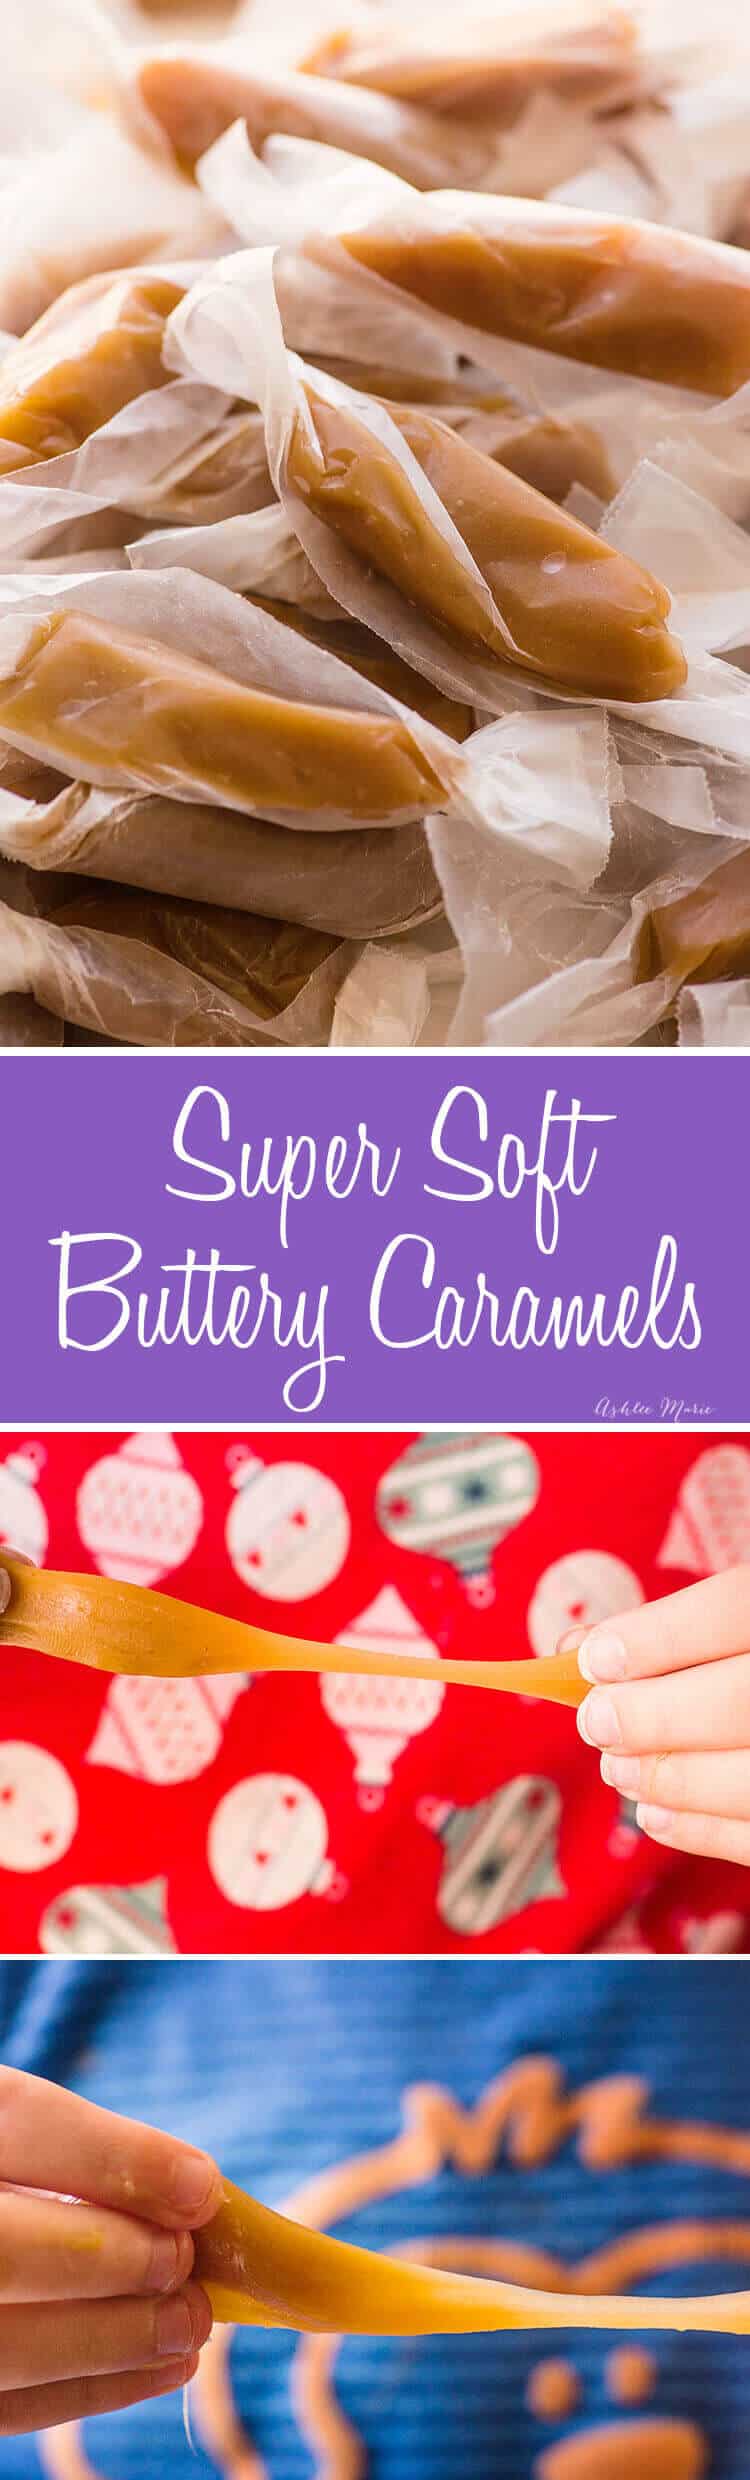 these soft butter caramels are made with brown sugar for a rich flavor and are super simple to make - full video tutorial